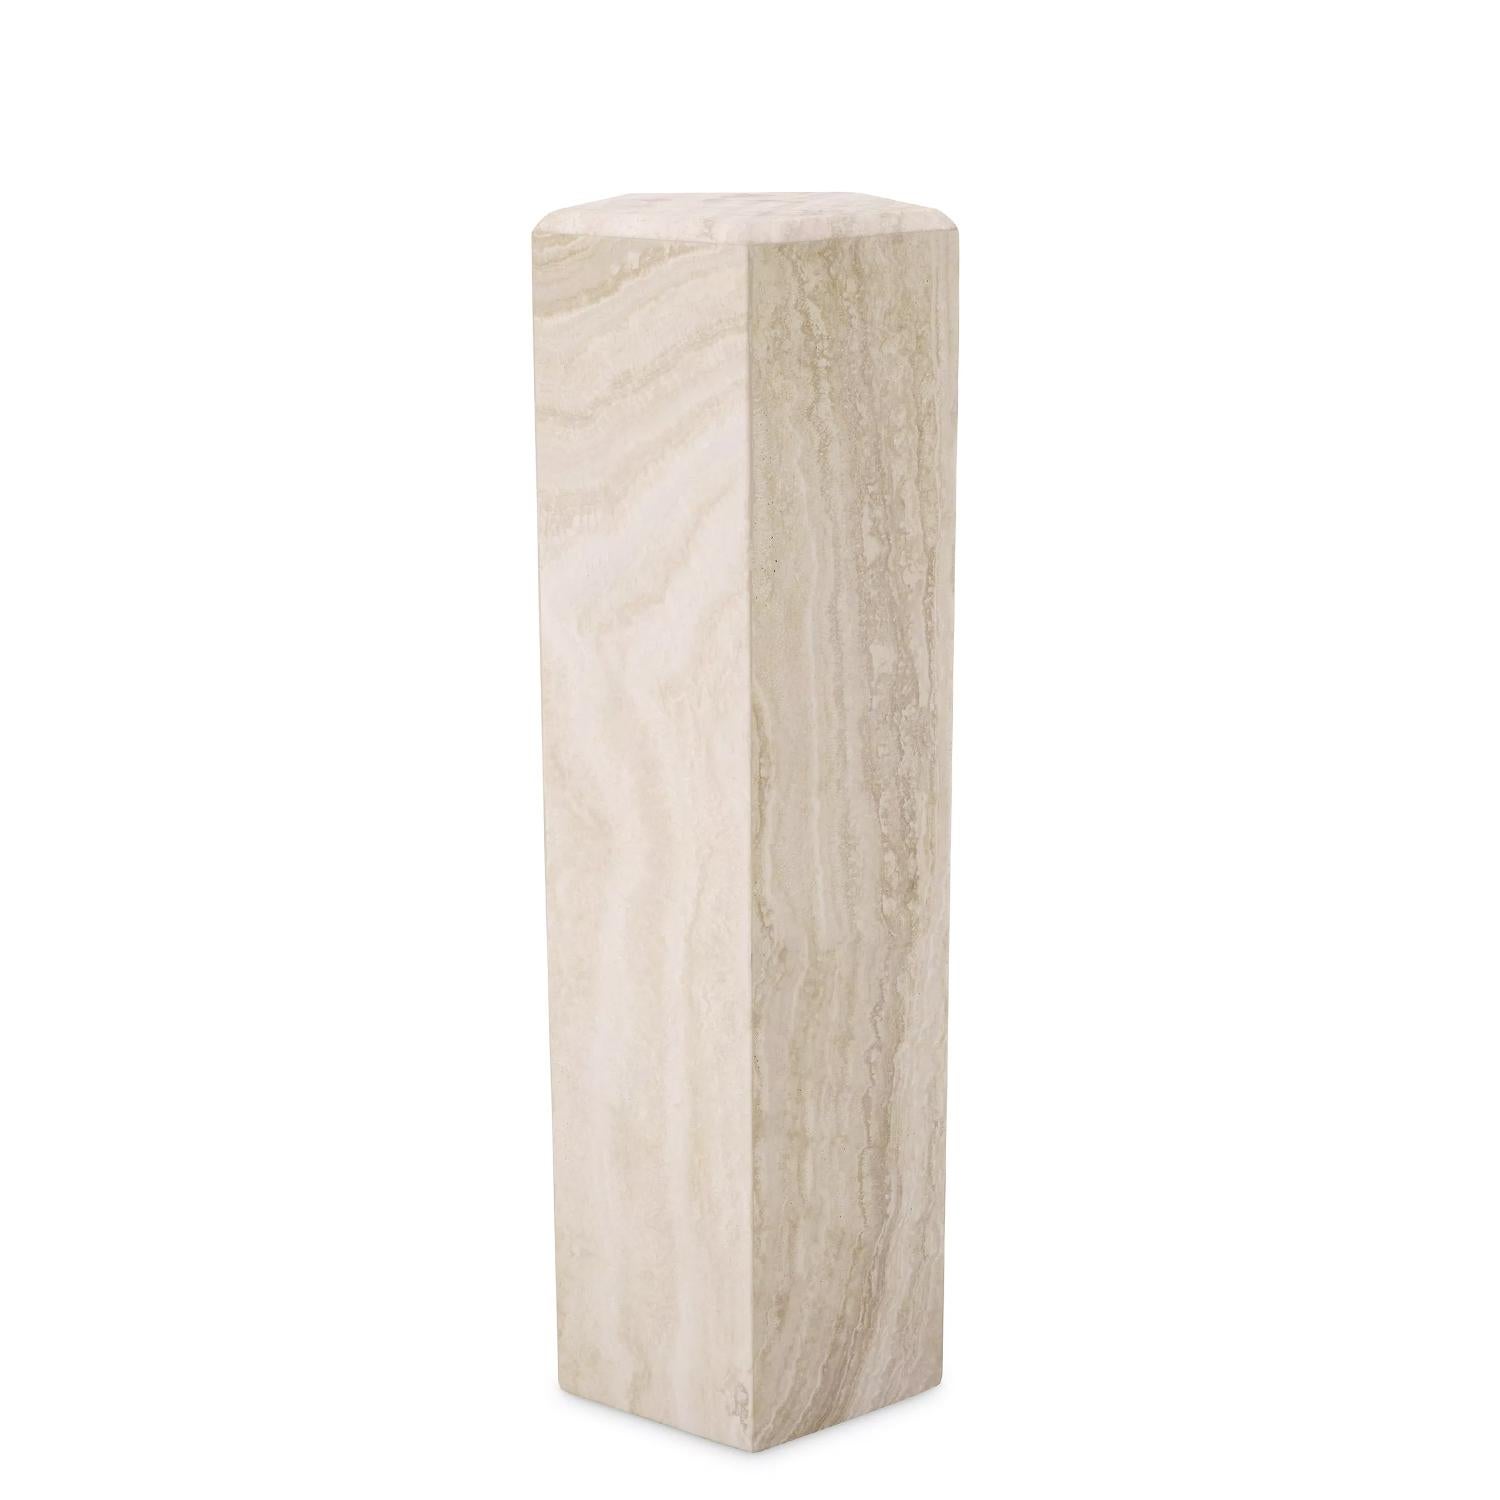 Pedestal Pretoria High all in thick 
carved travertine in polished finish.